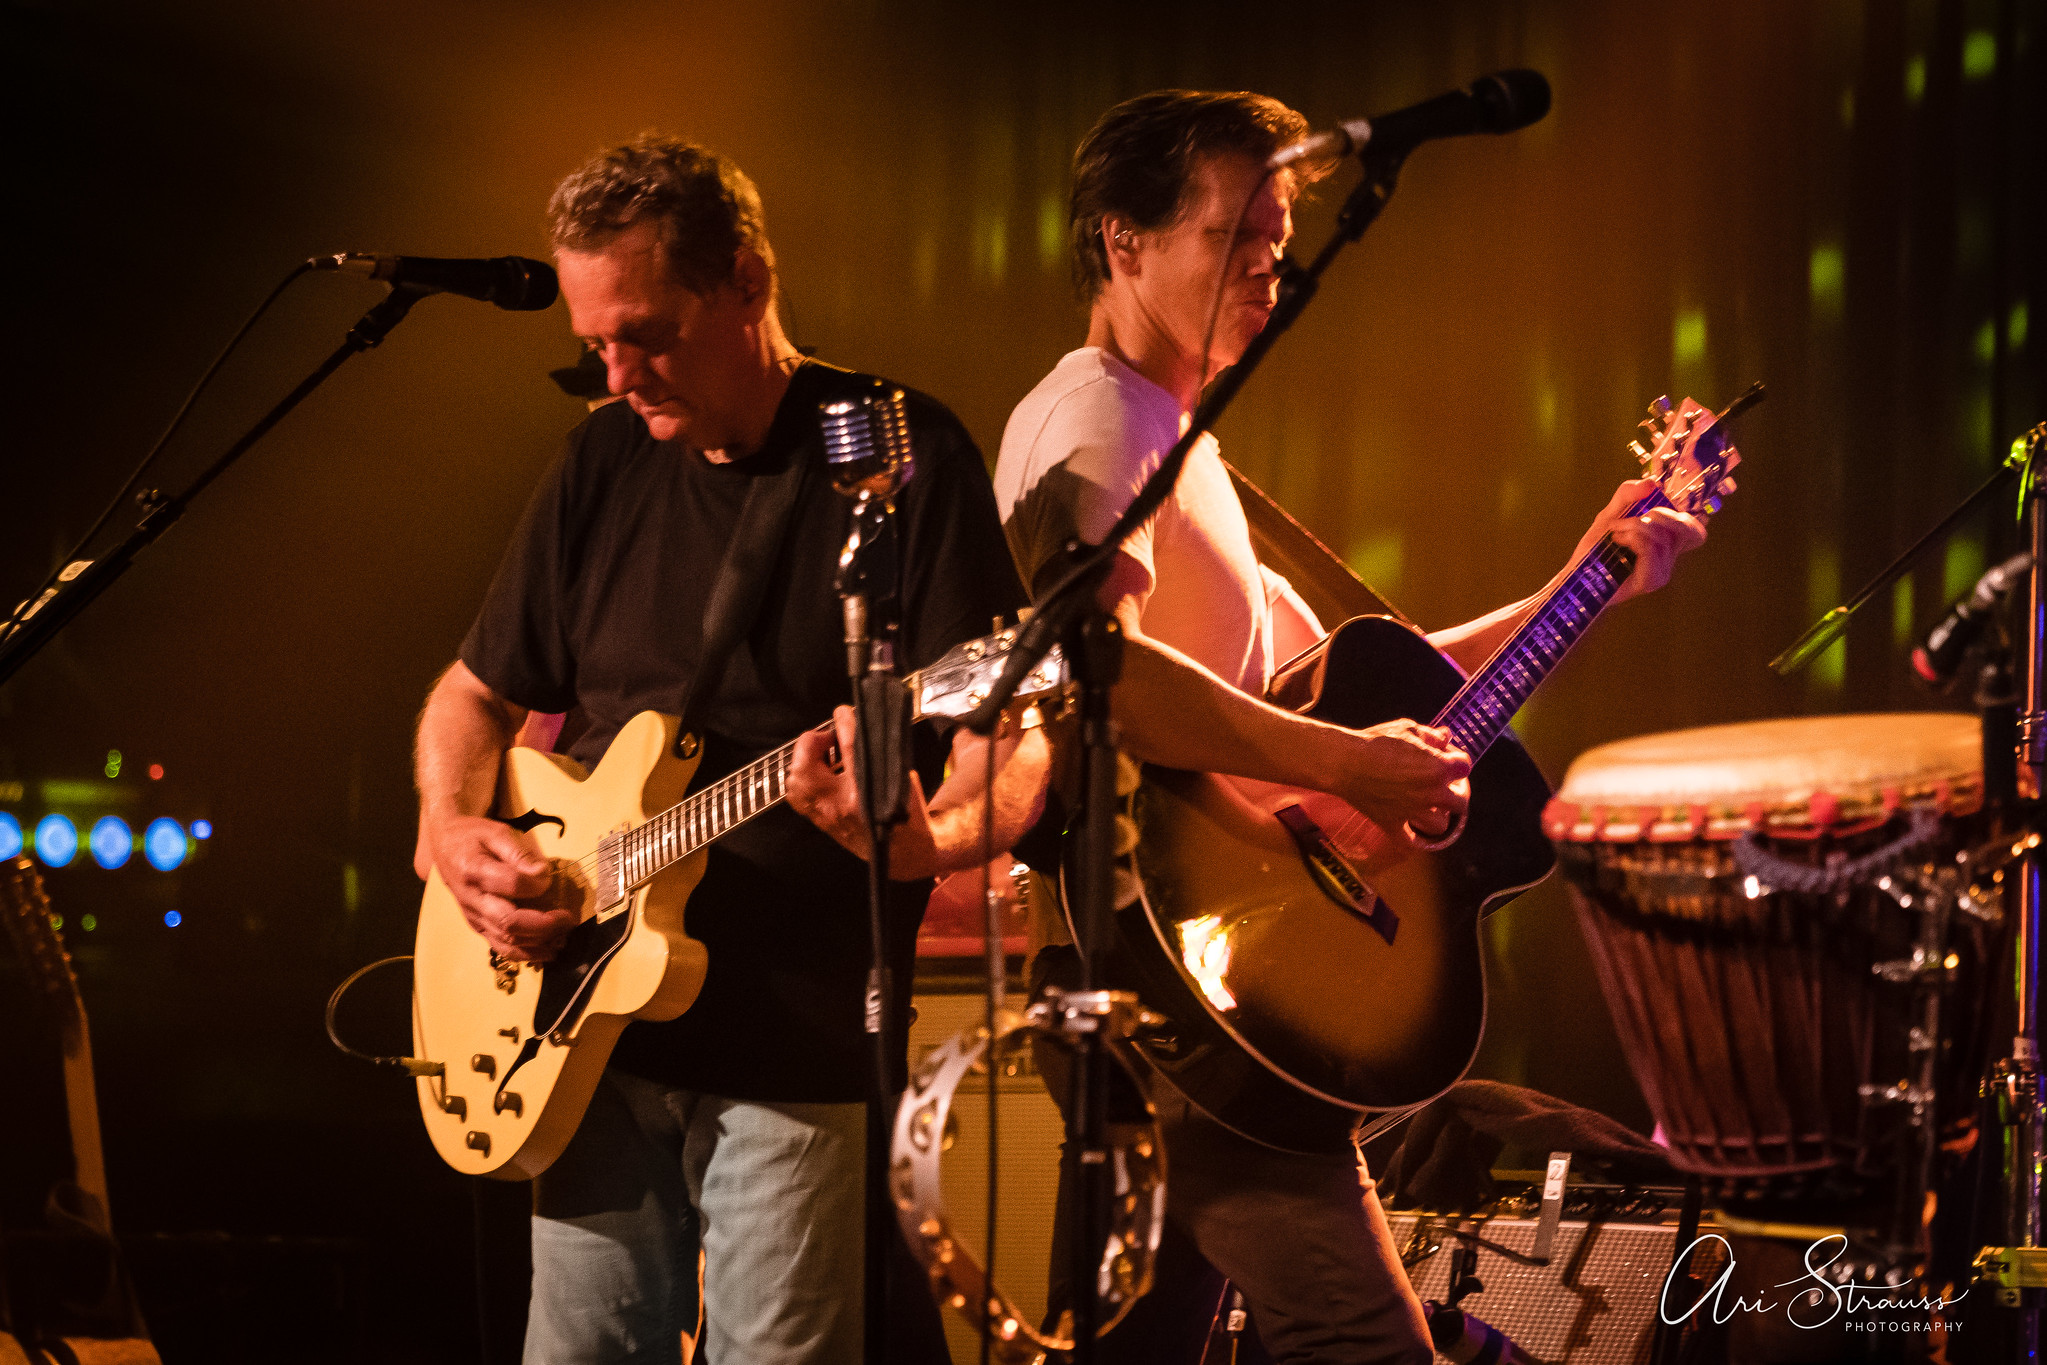 BaconBrothers